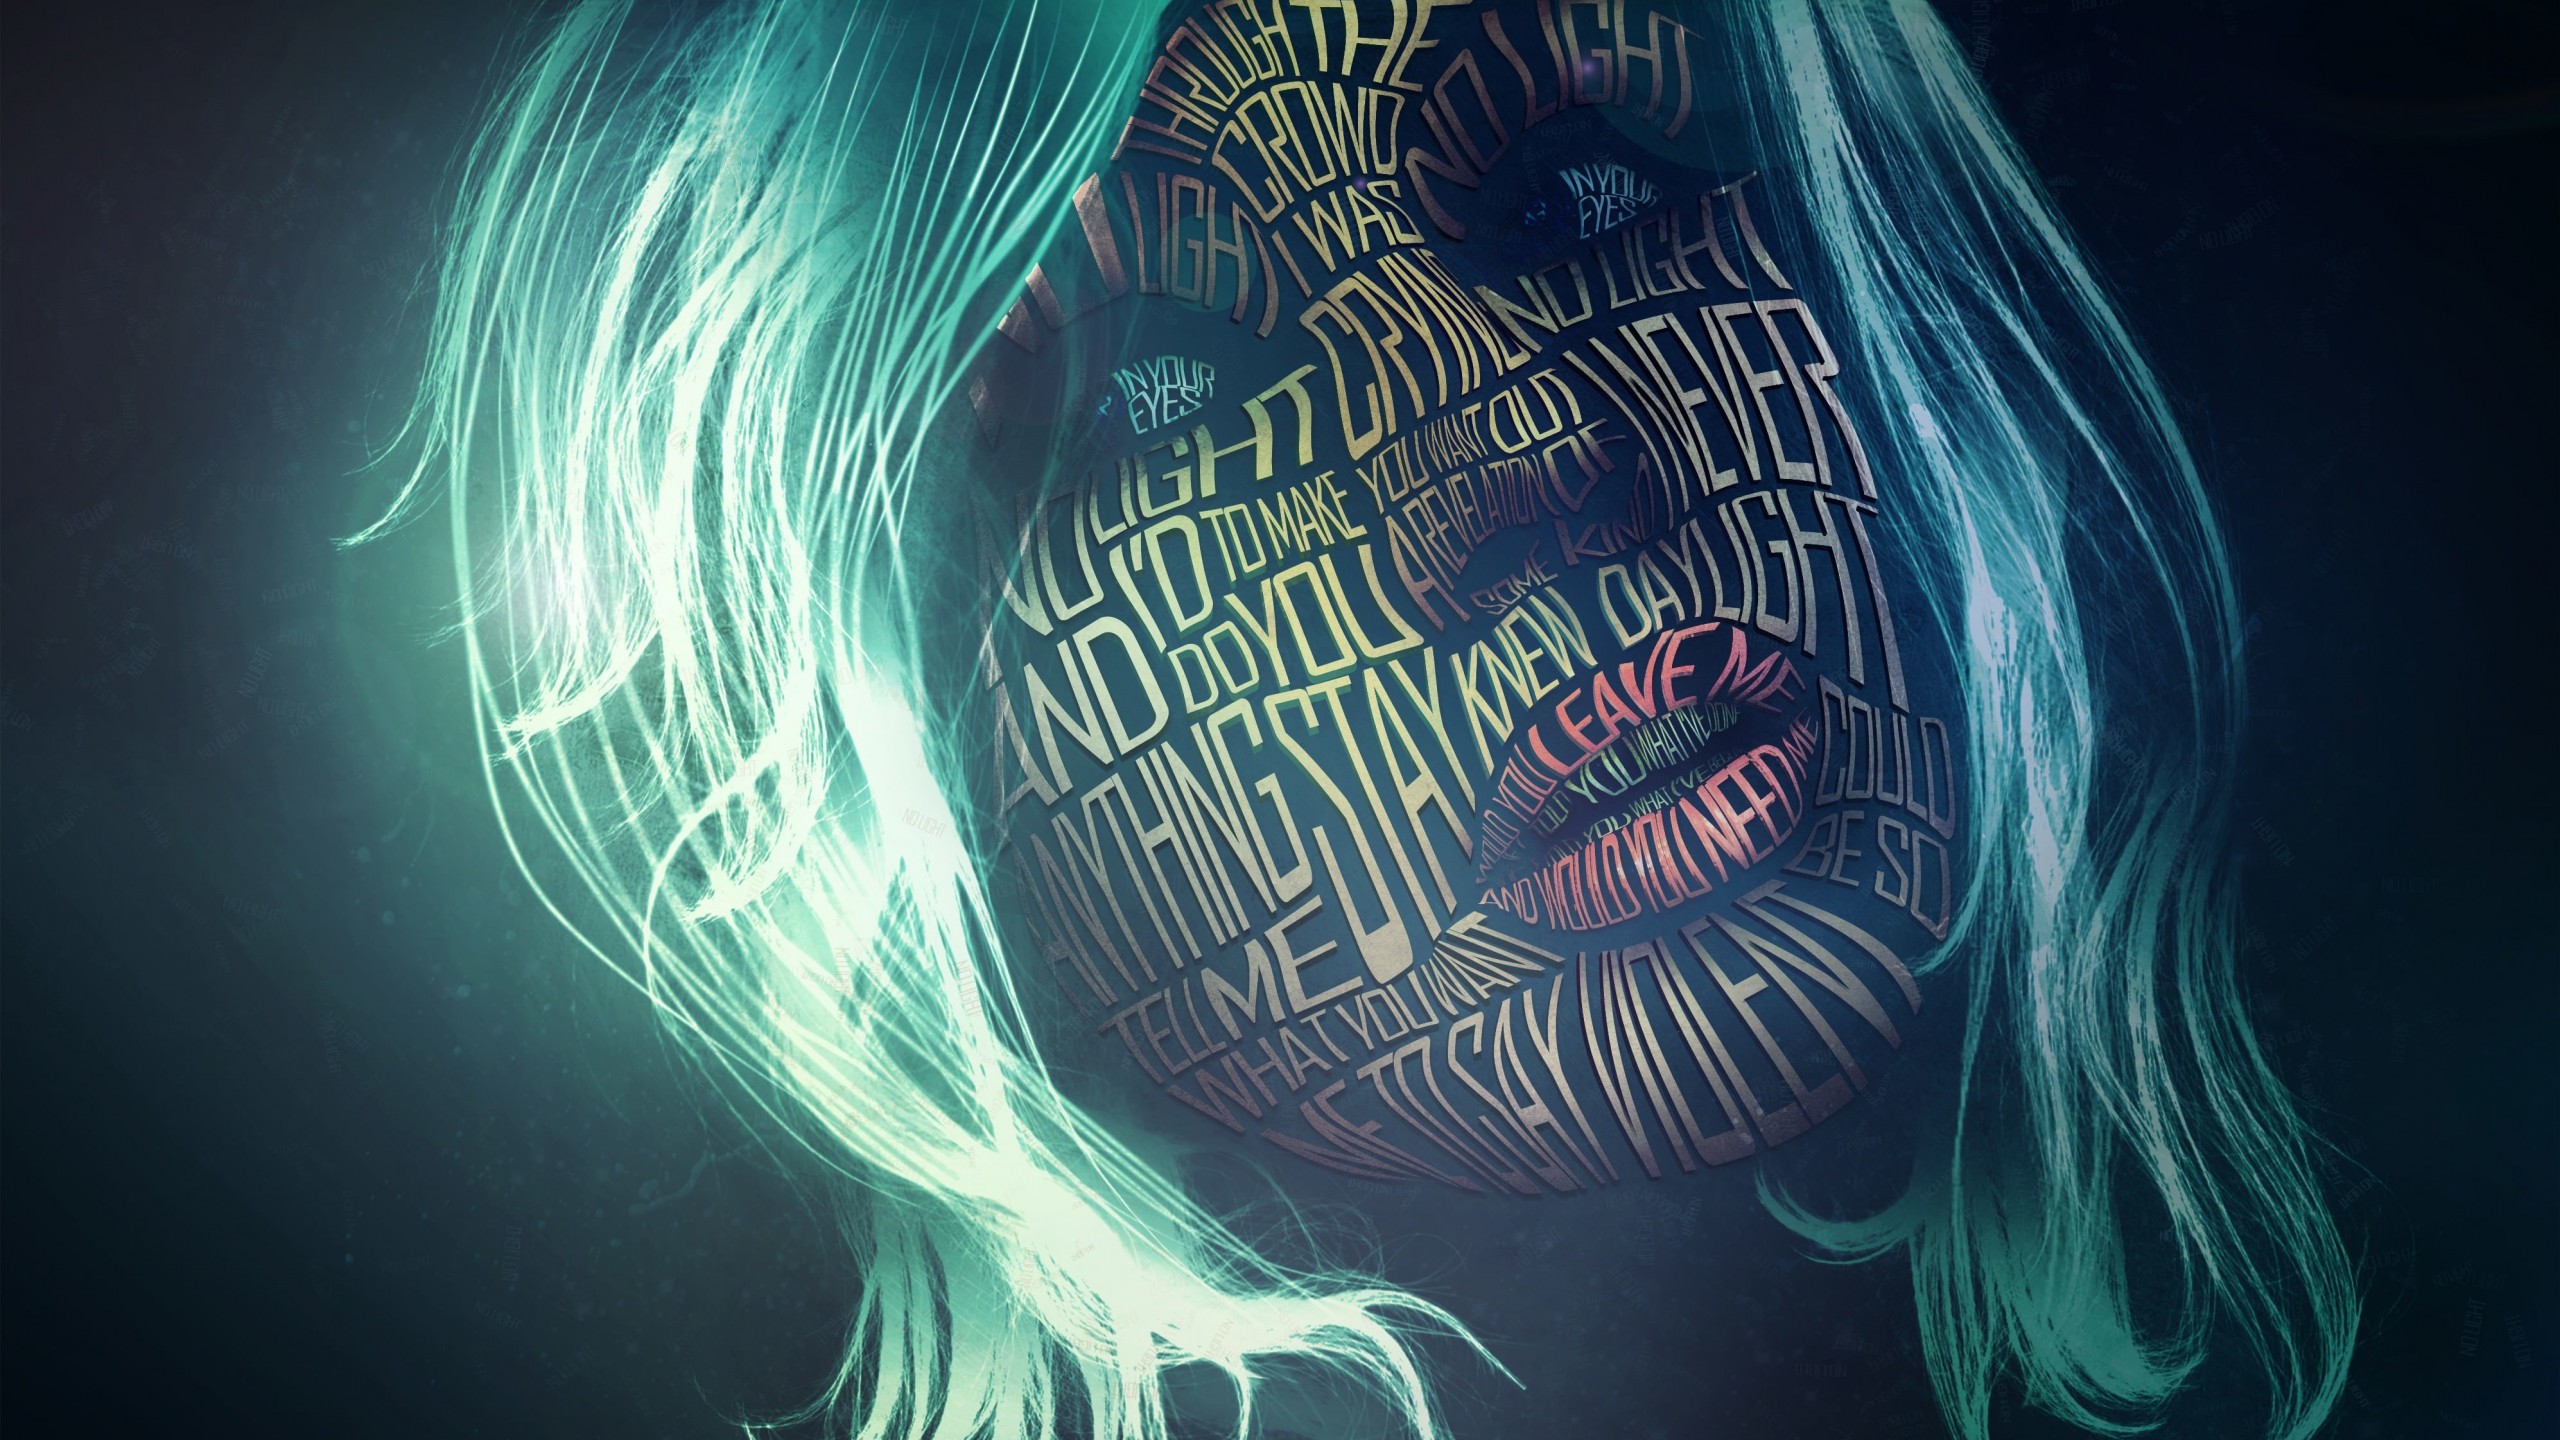 Woman Face Typography Wallpaper for Social Media YouTube Channel Art